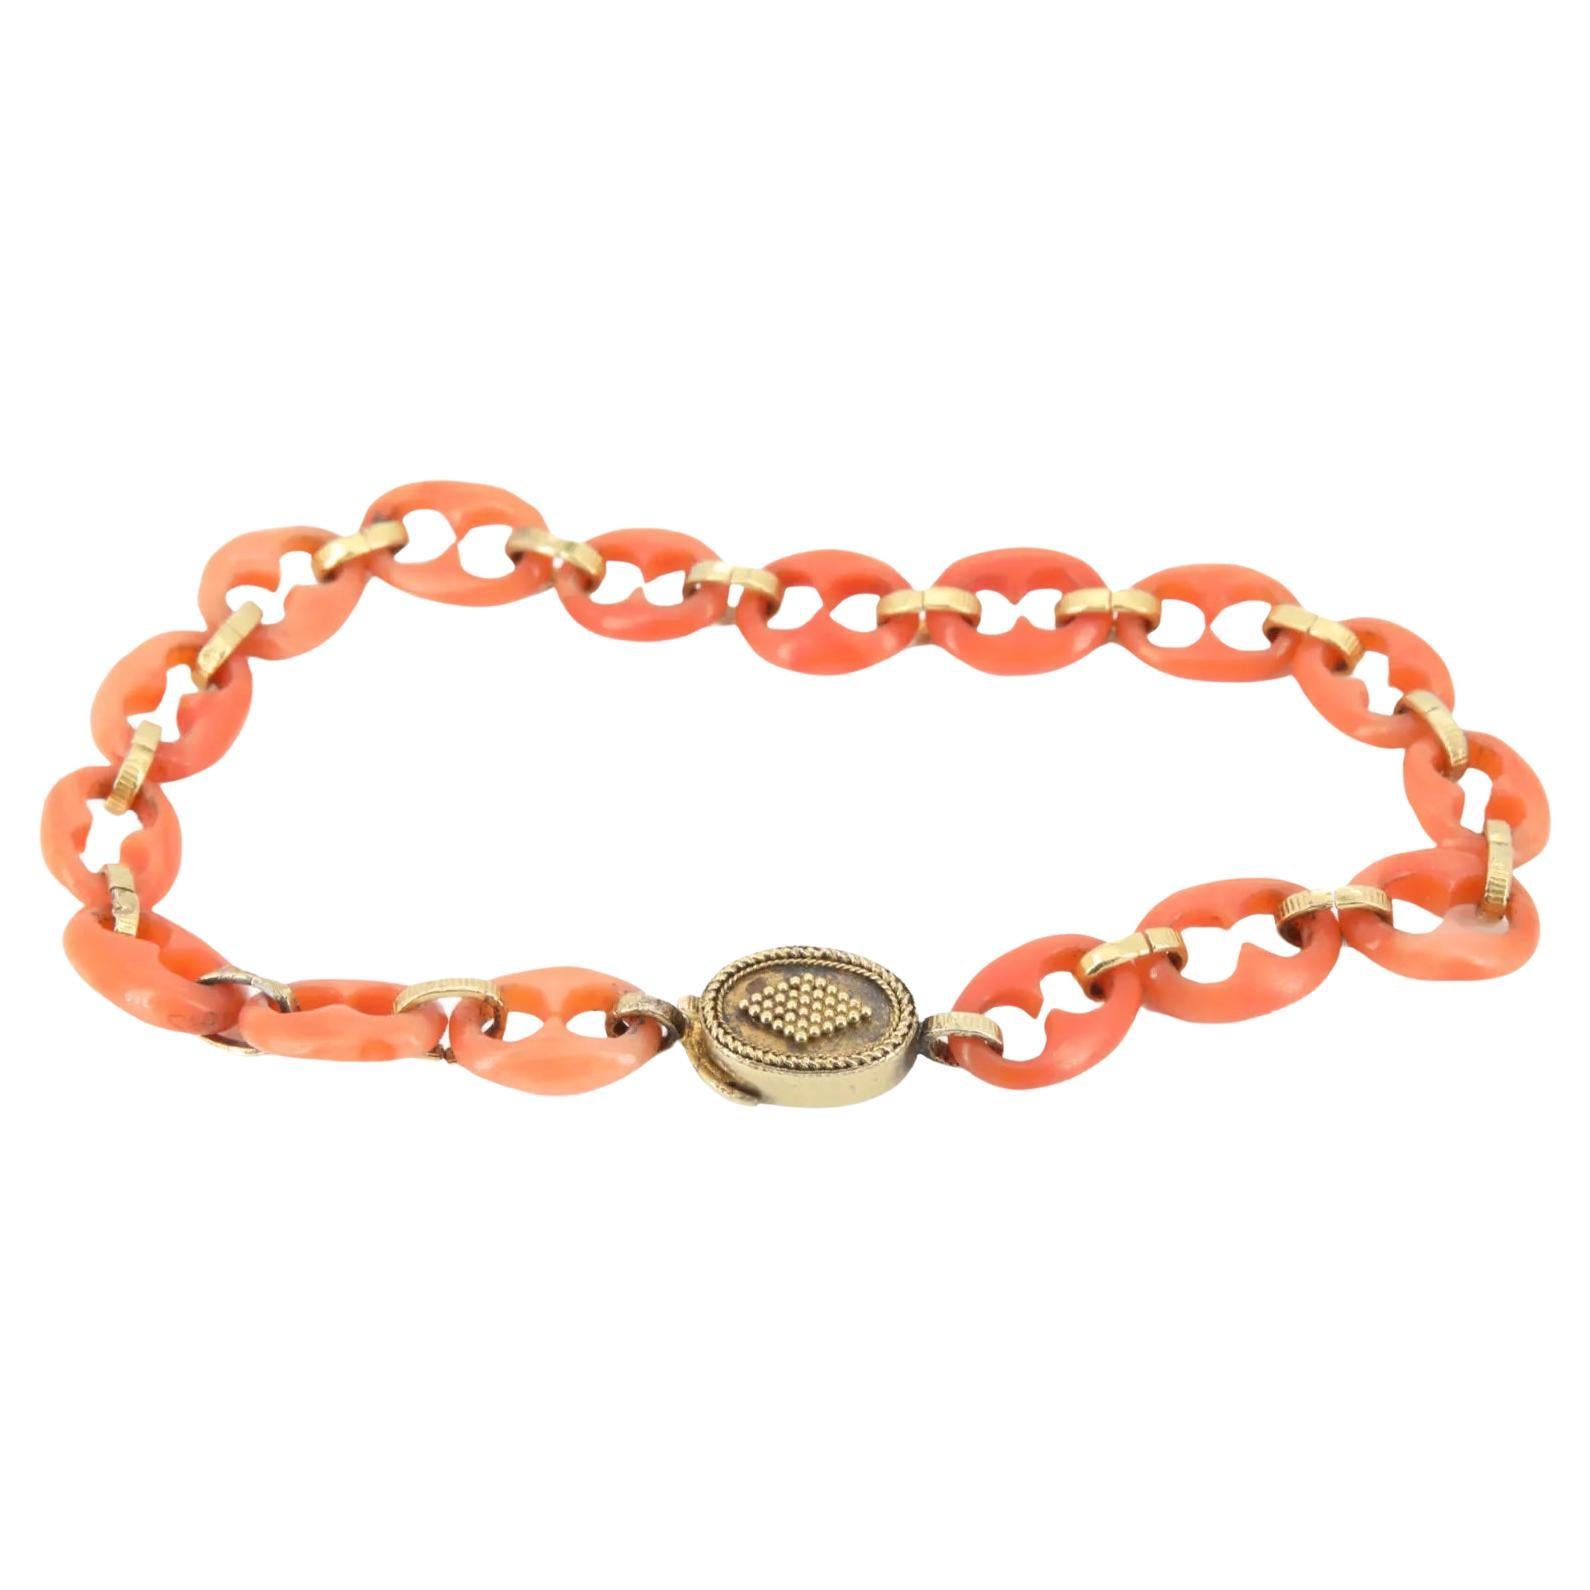 An Italian victorian period handmade carved coral link bracelet with 18 karat go For Sale